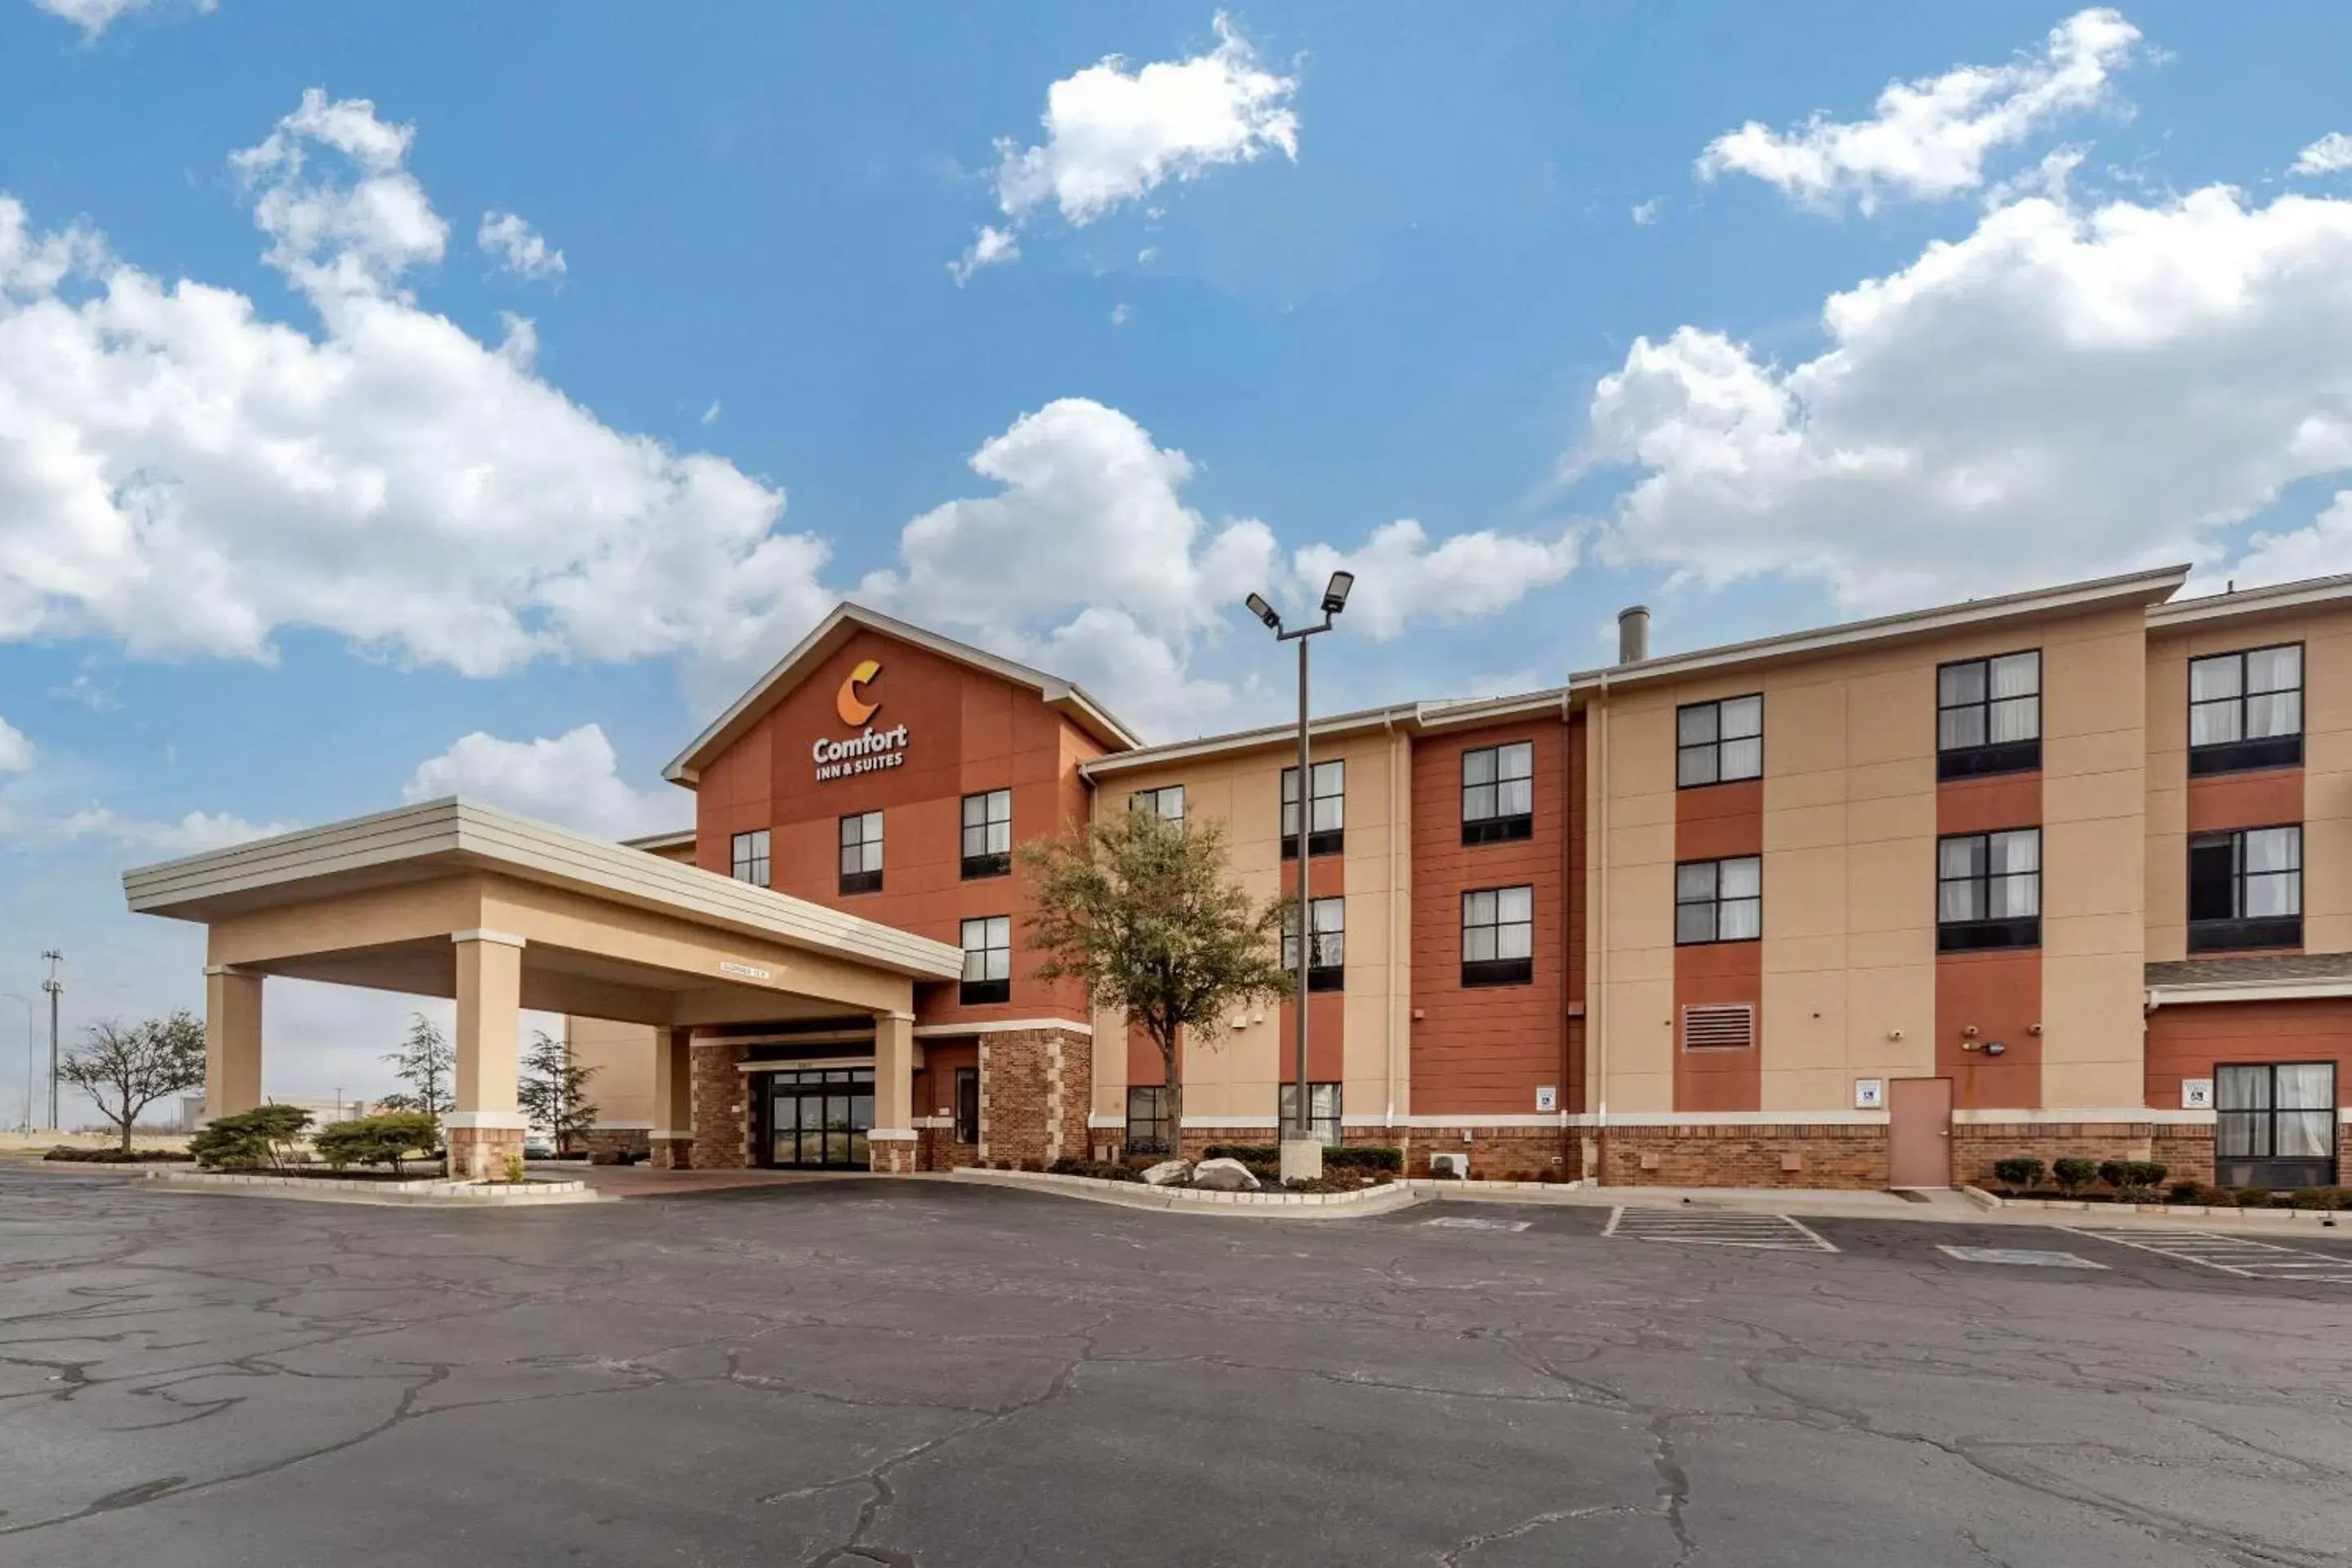 Property Building in Comfort Inn & Suites Shawnee North near I-40